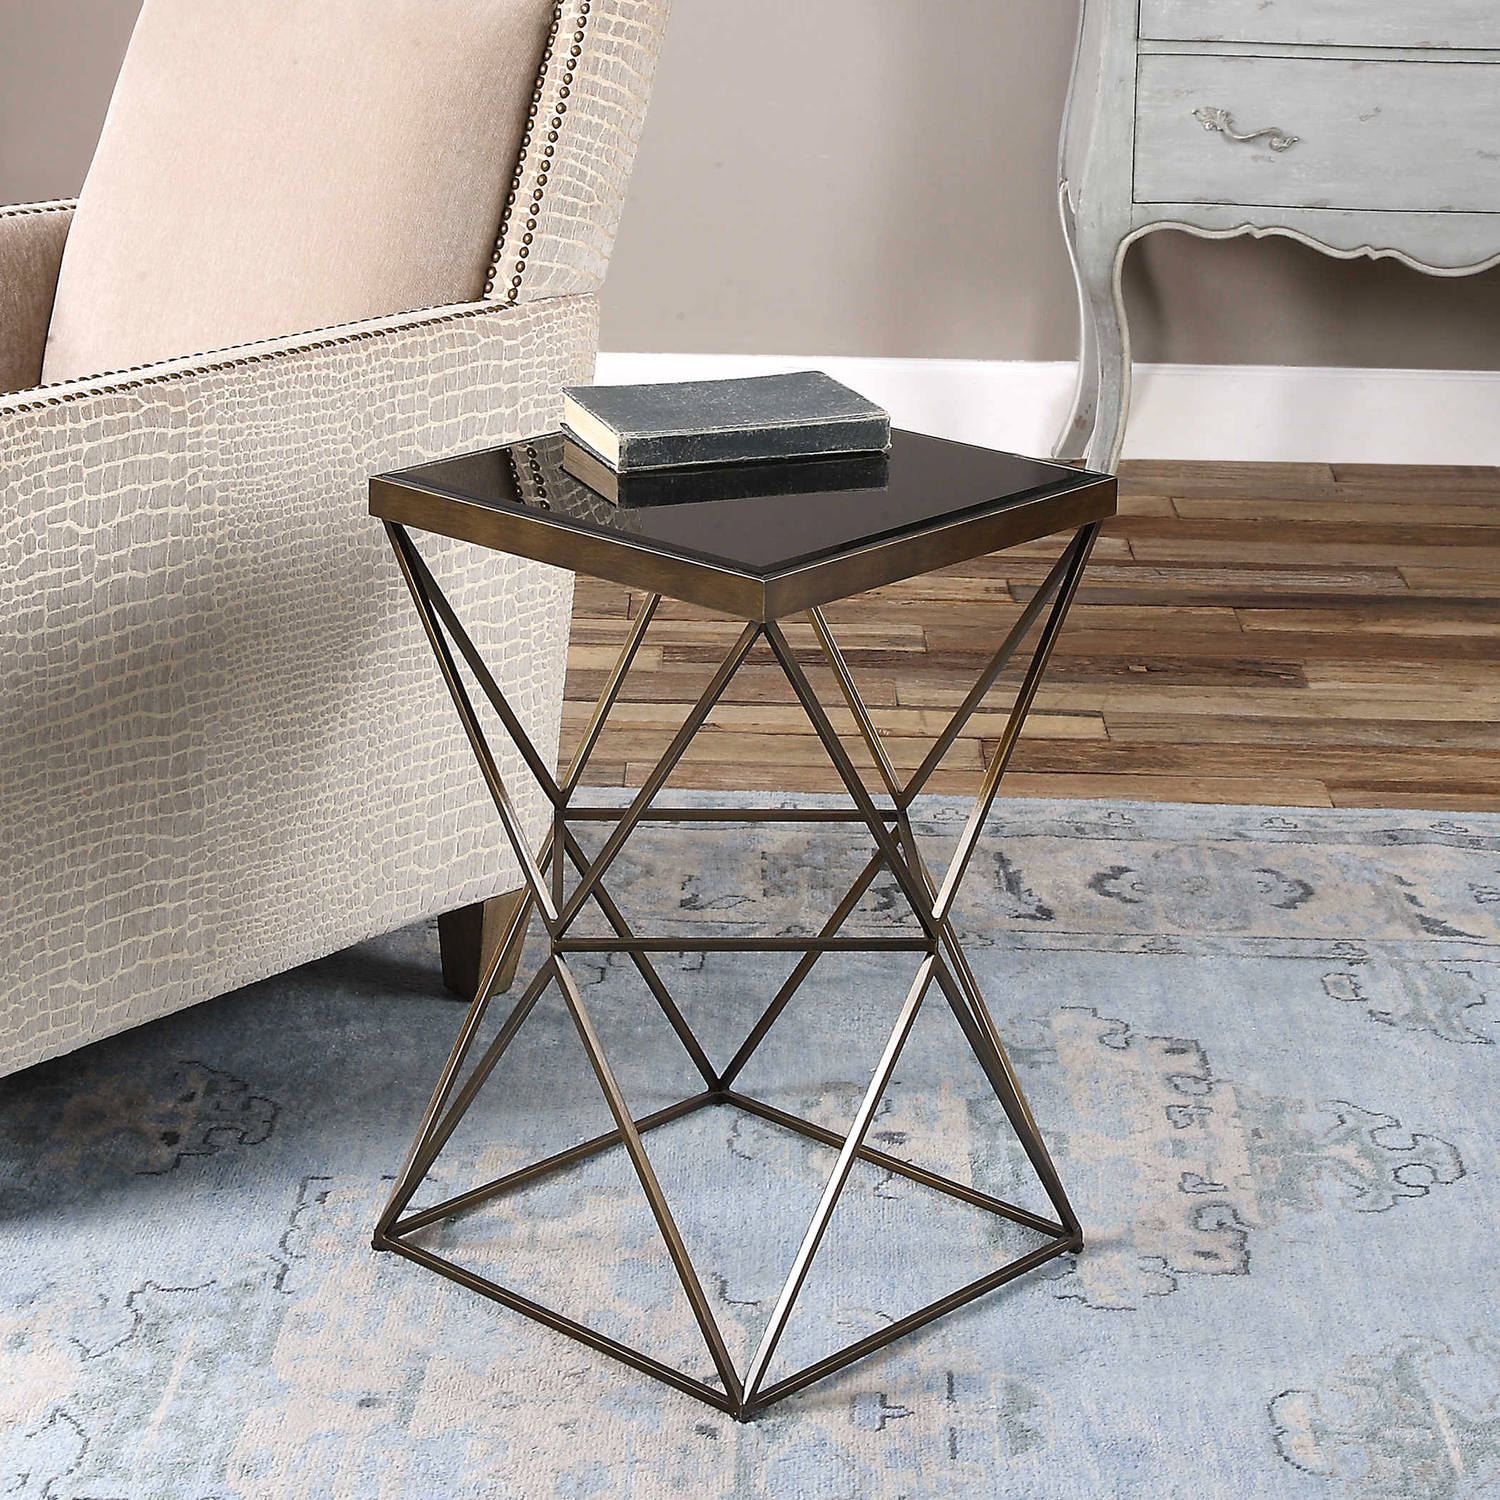 thin console table Uttermost Accent & End Tables Featuring A Modern Geometric Style Base In Antique Bronze Finished Steel, Topped With Beveled Black Tempered Glass.